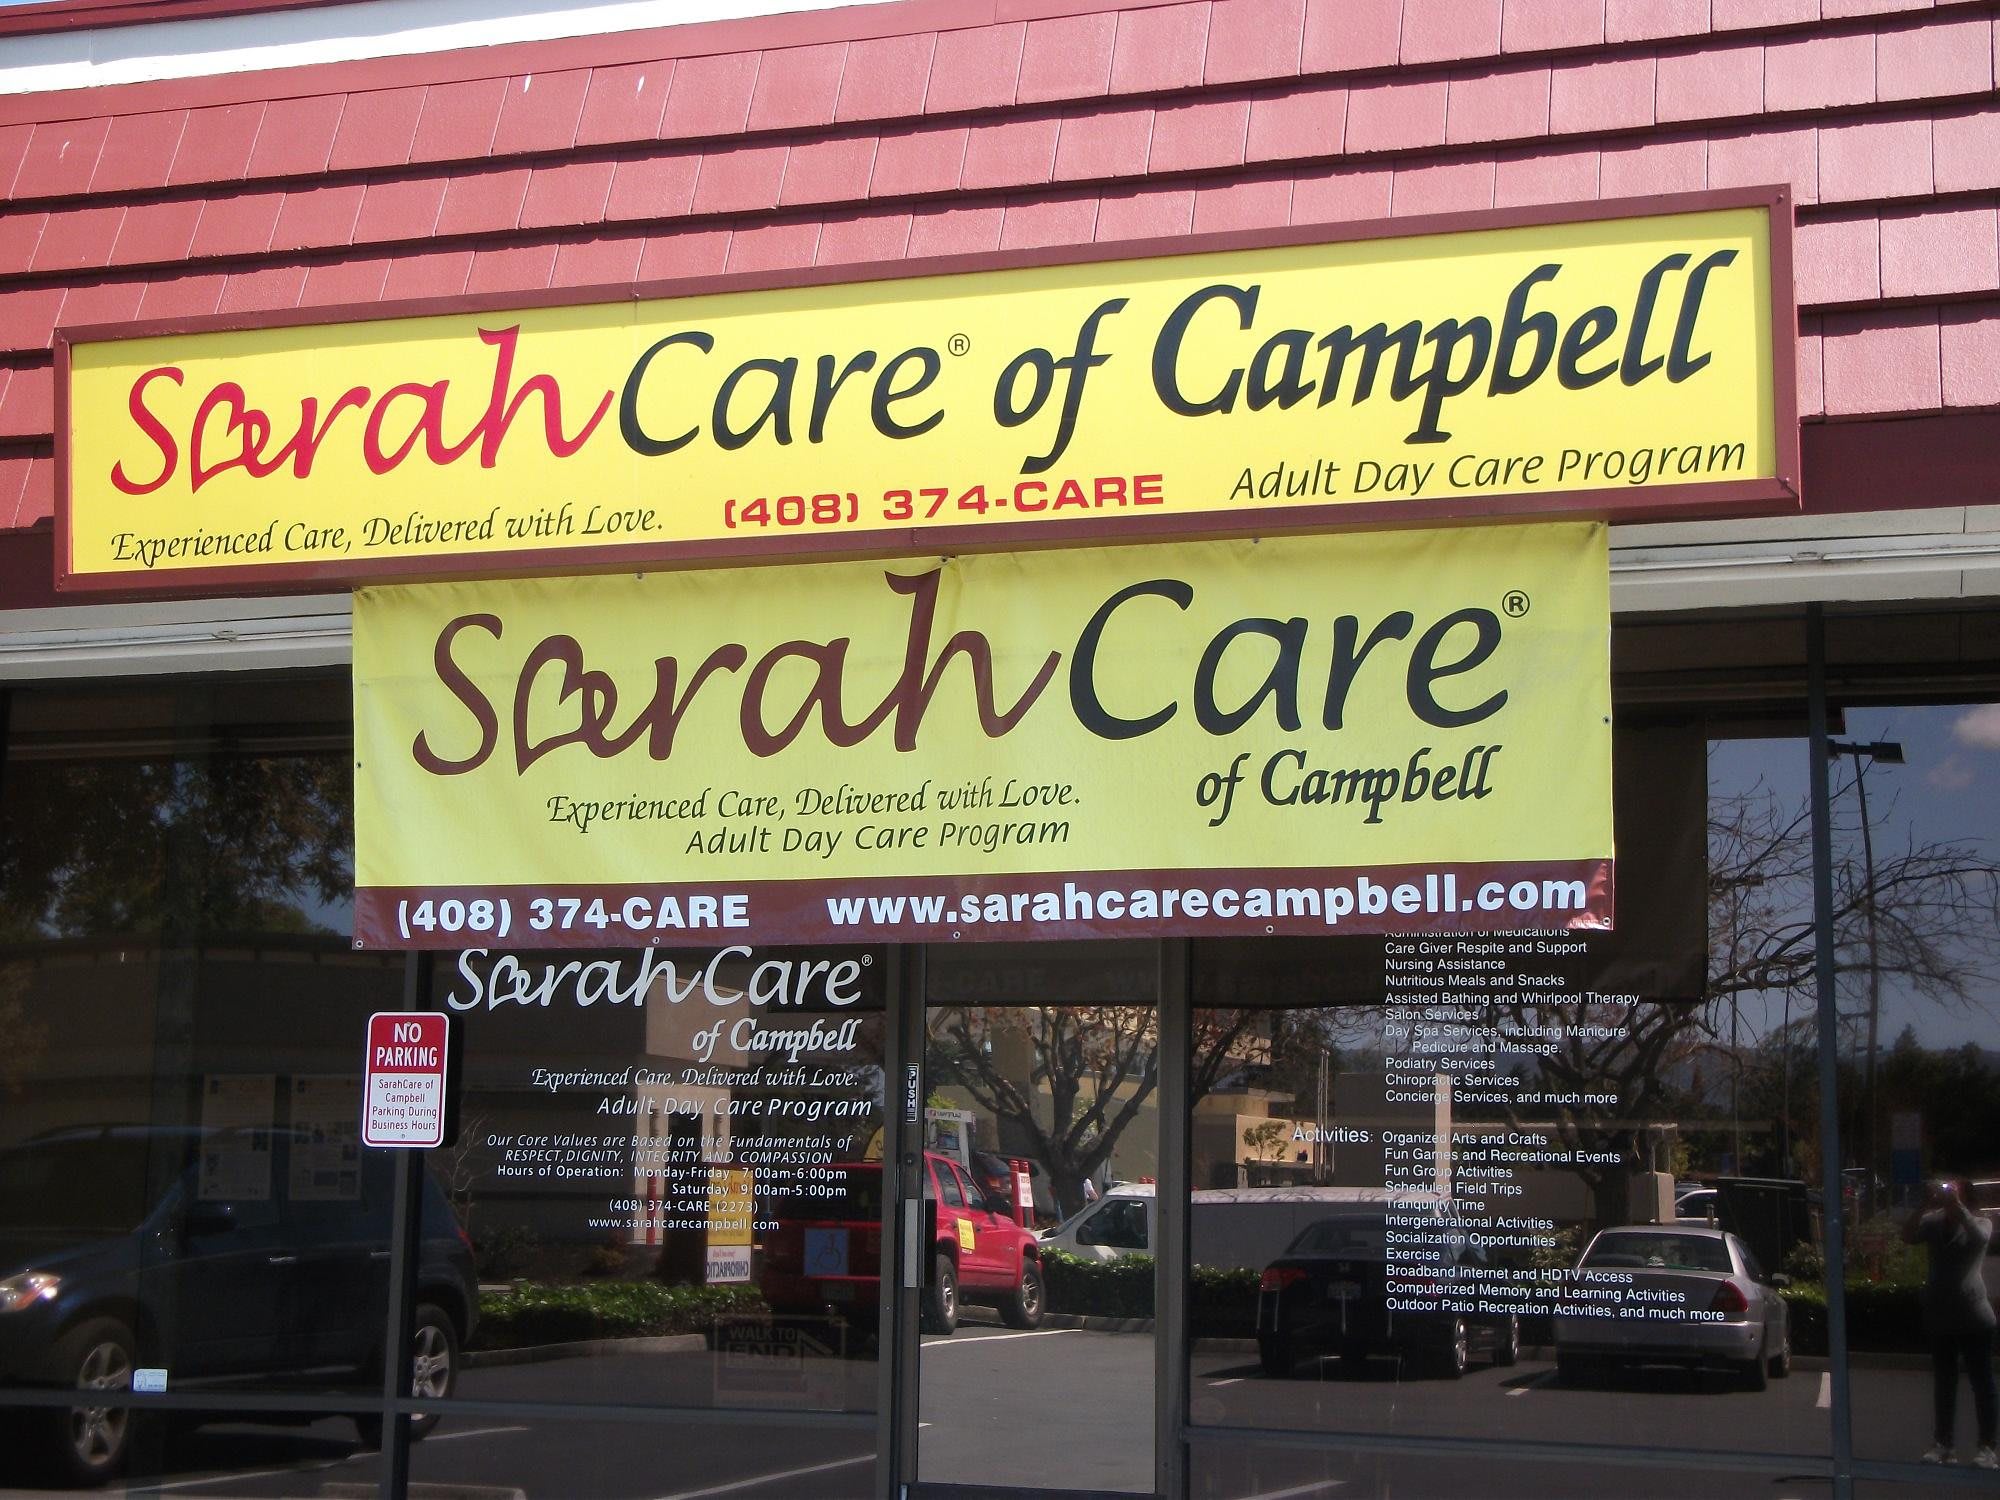 SarahCare of Campbell